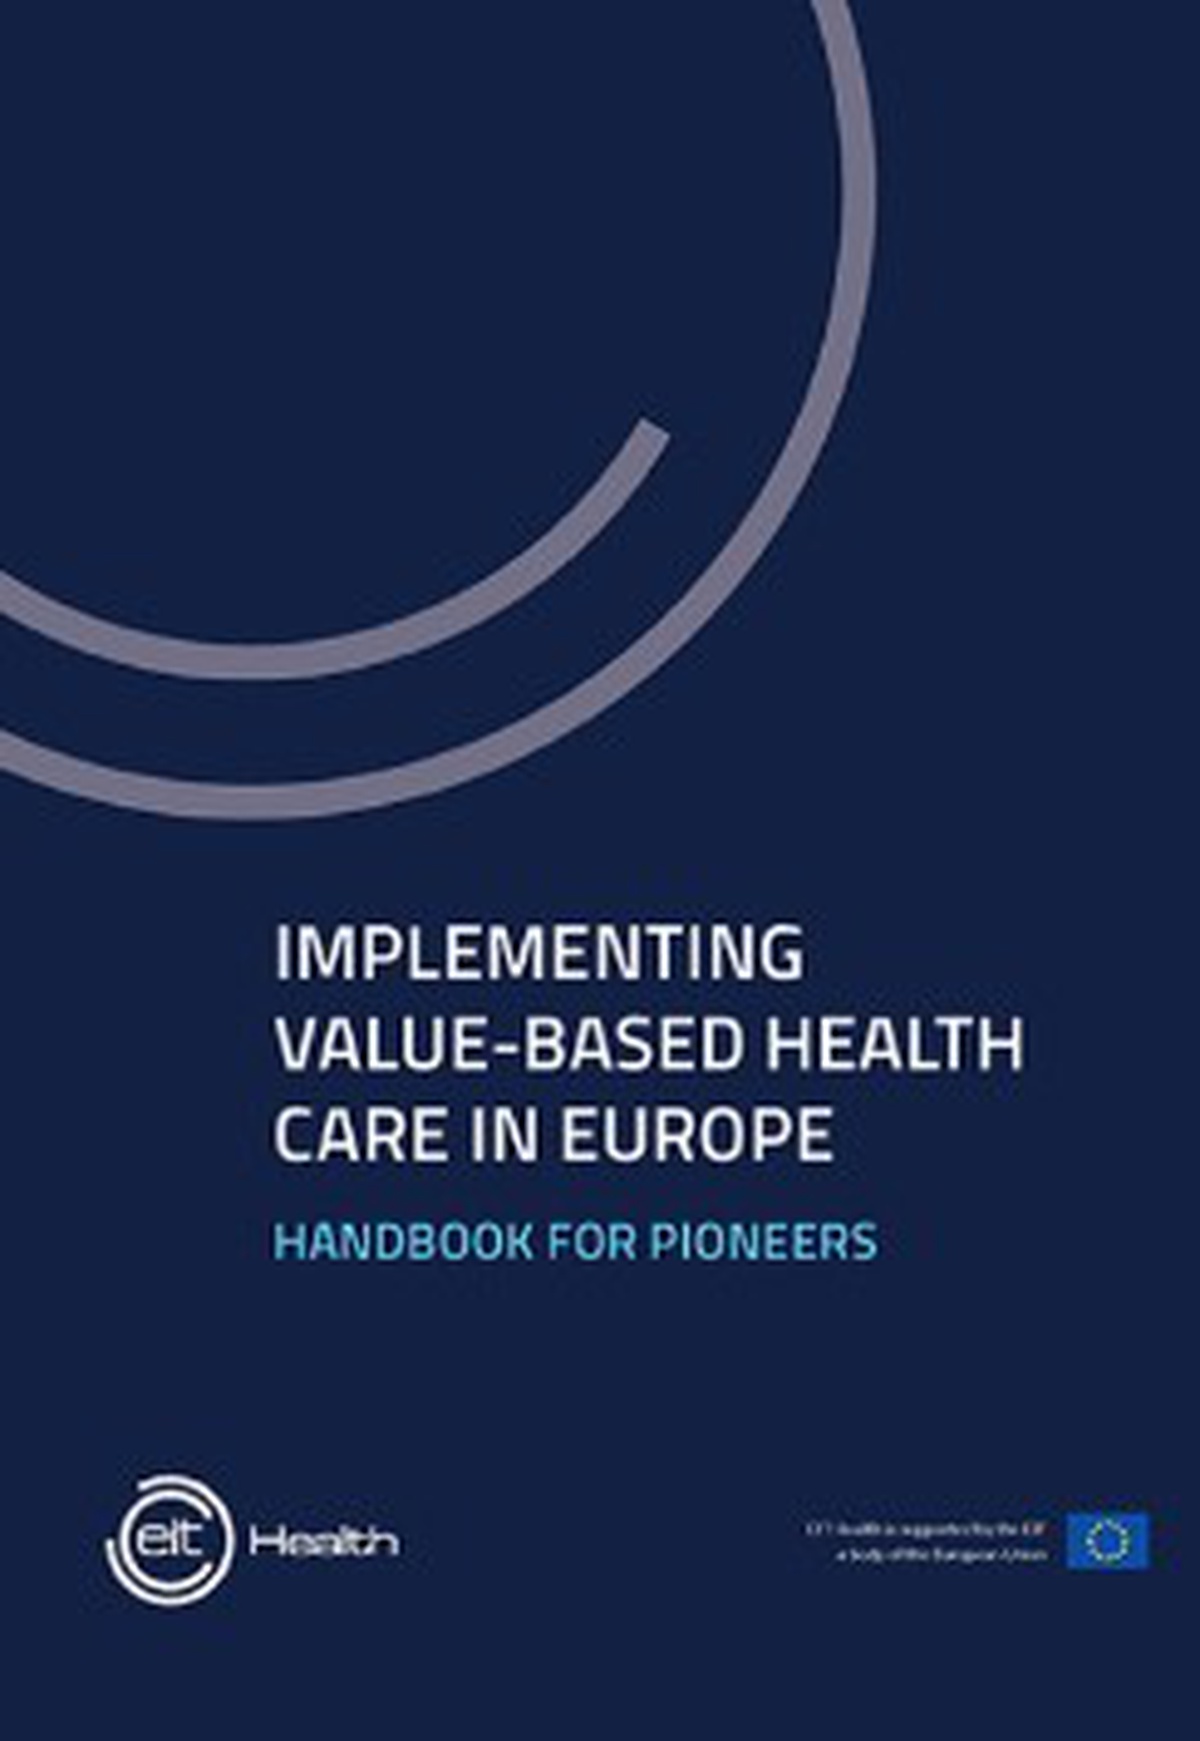 O EIT Health lançou o Manual "Implementing Value-Based Health Care in Europe: Handbook for Pioneers"